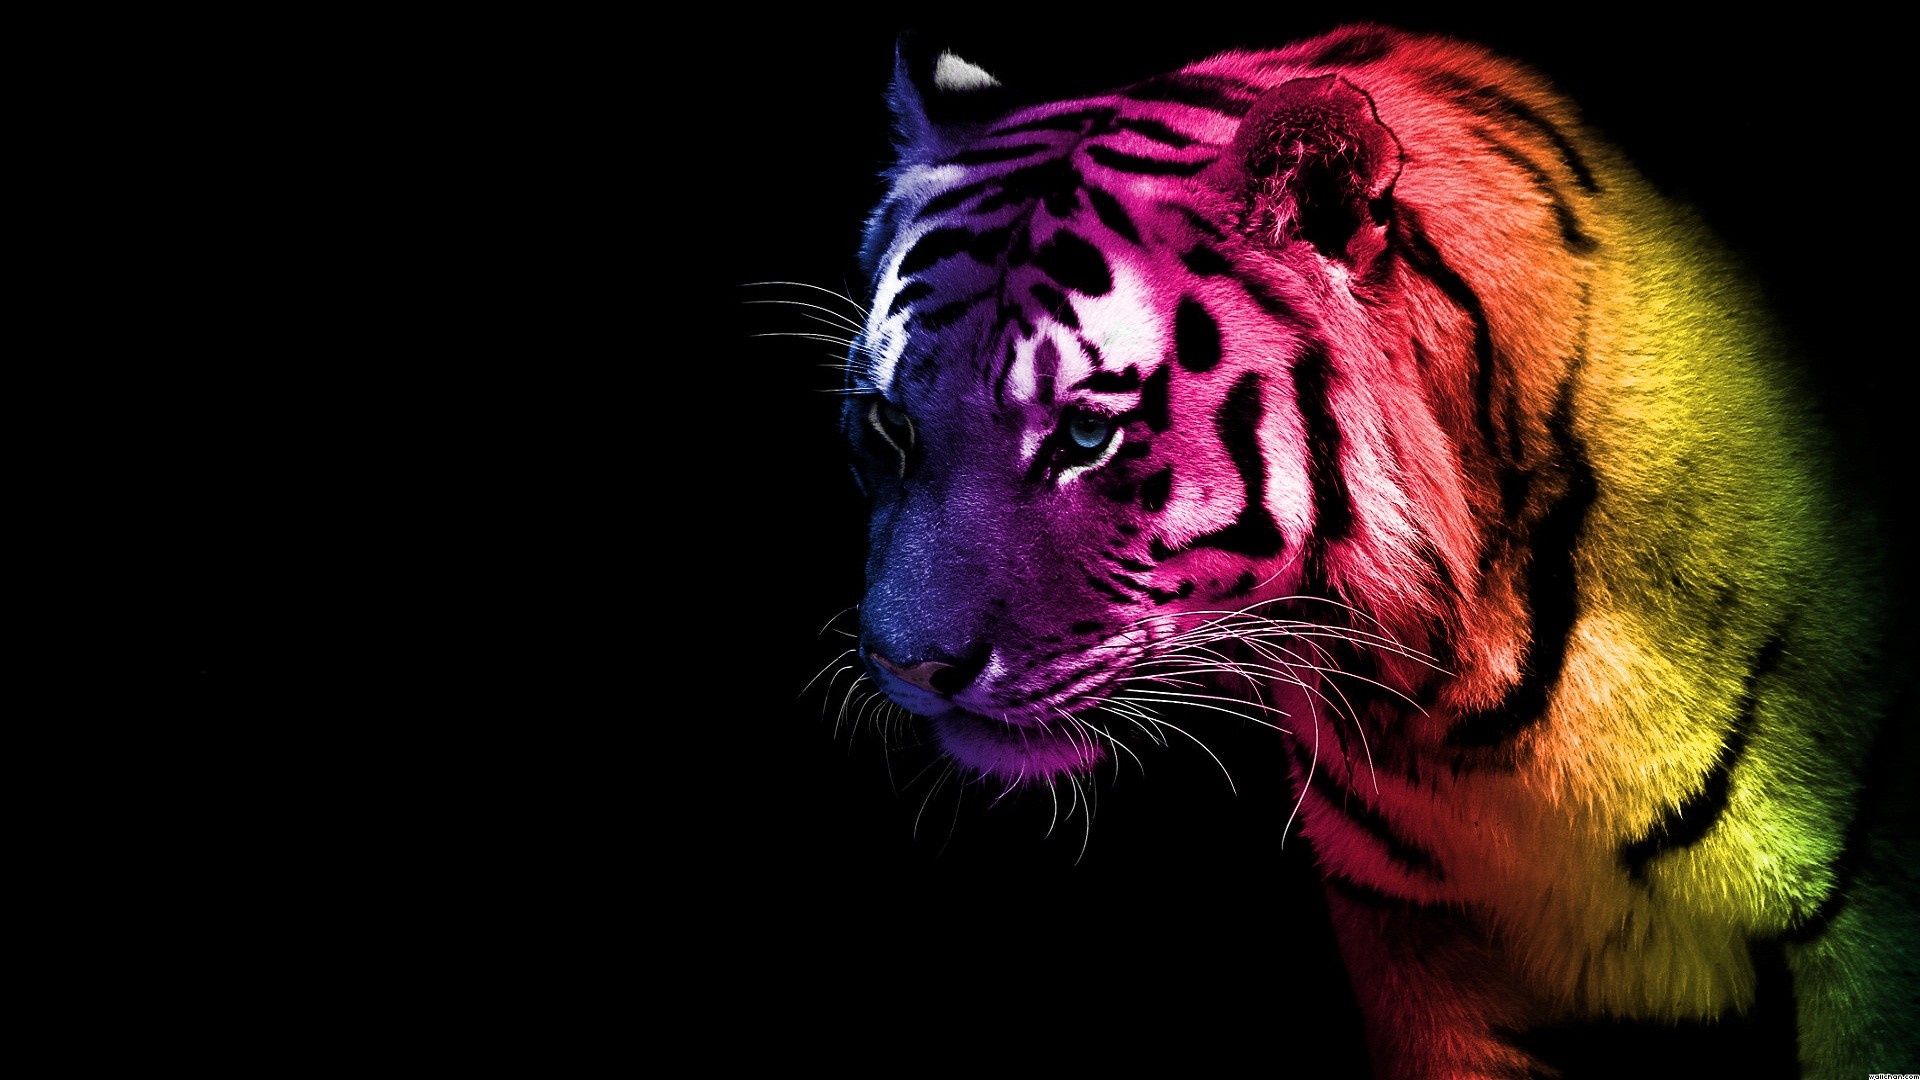 1920x1080 Search Results for “rainbow tiger wallpaper” – Adorable Wallpapers